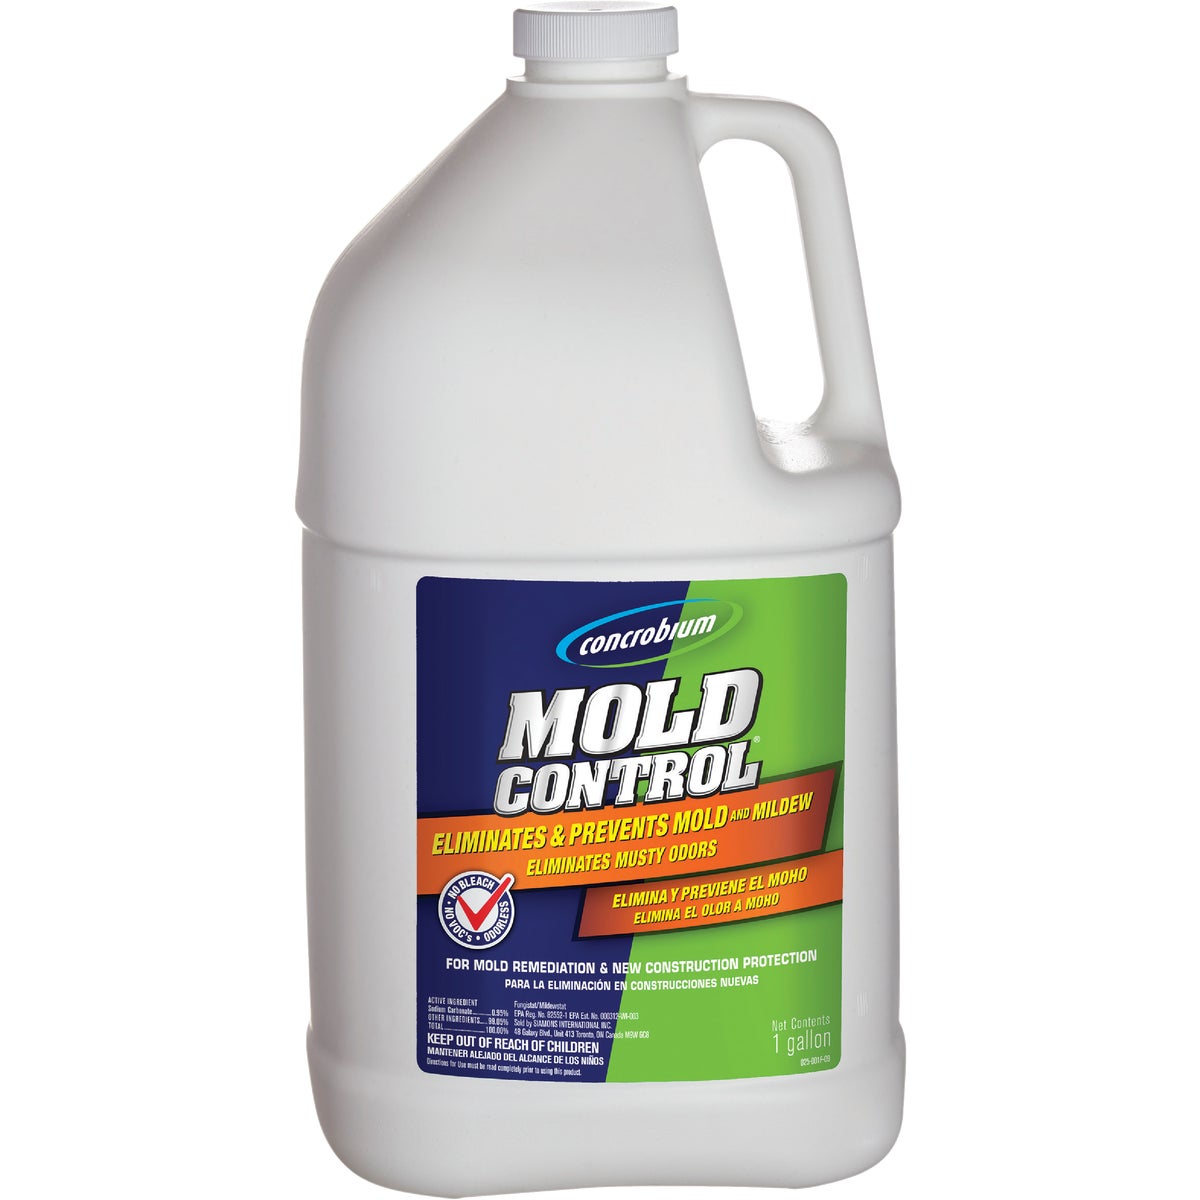 Item 600103, Odorless and colorless Concrobium Mold Control eliminates existing mold 